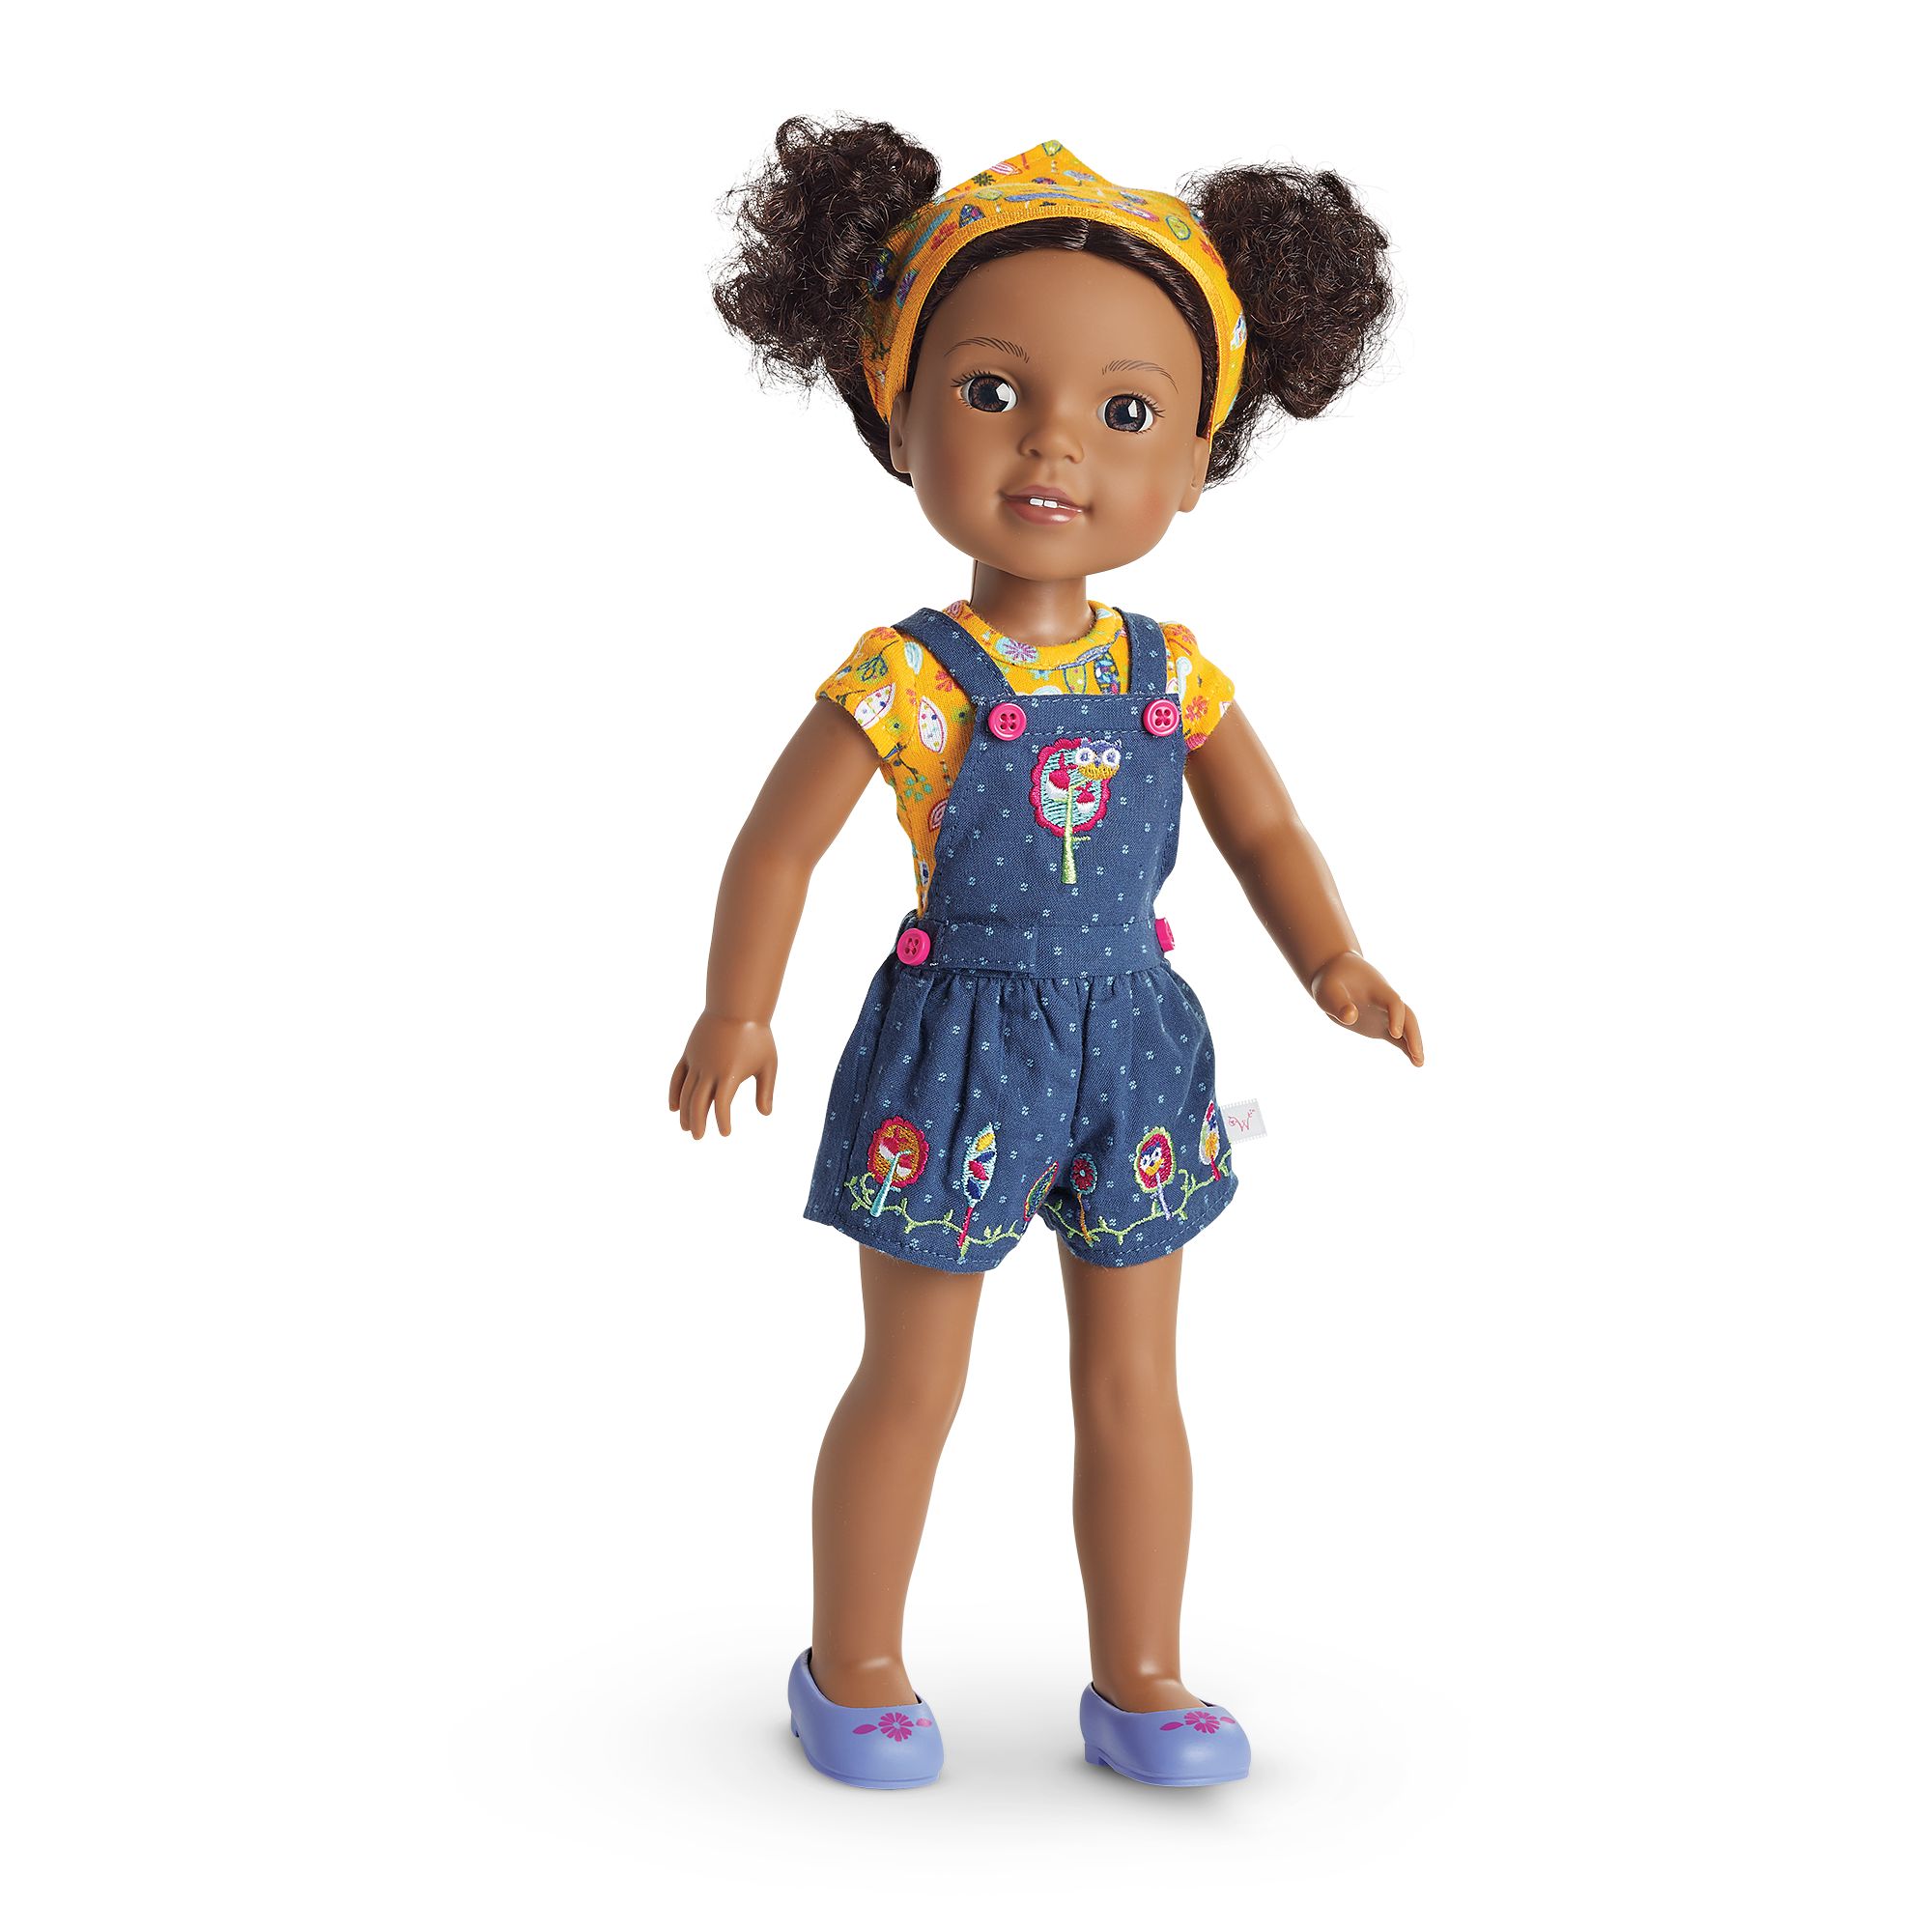 Outdoors in Overalls Outfit | American Girl Wiki | Fandom